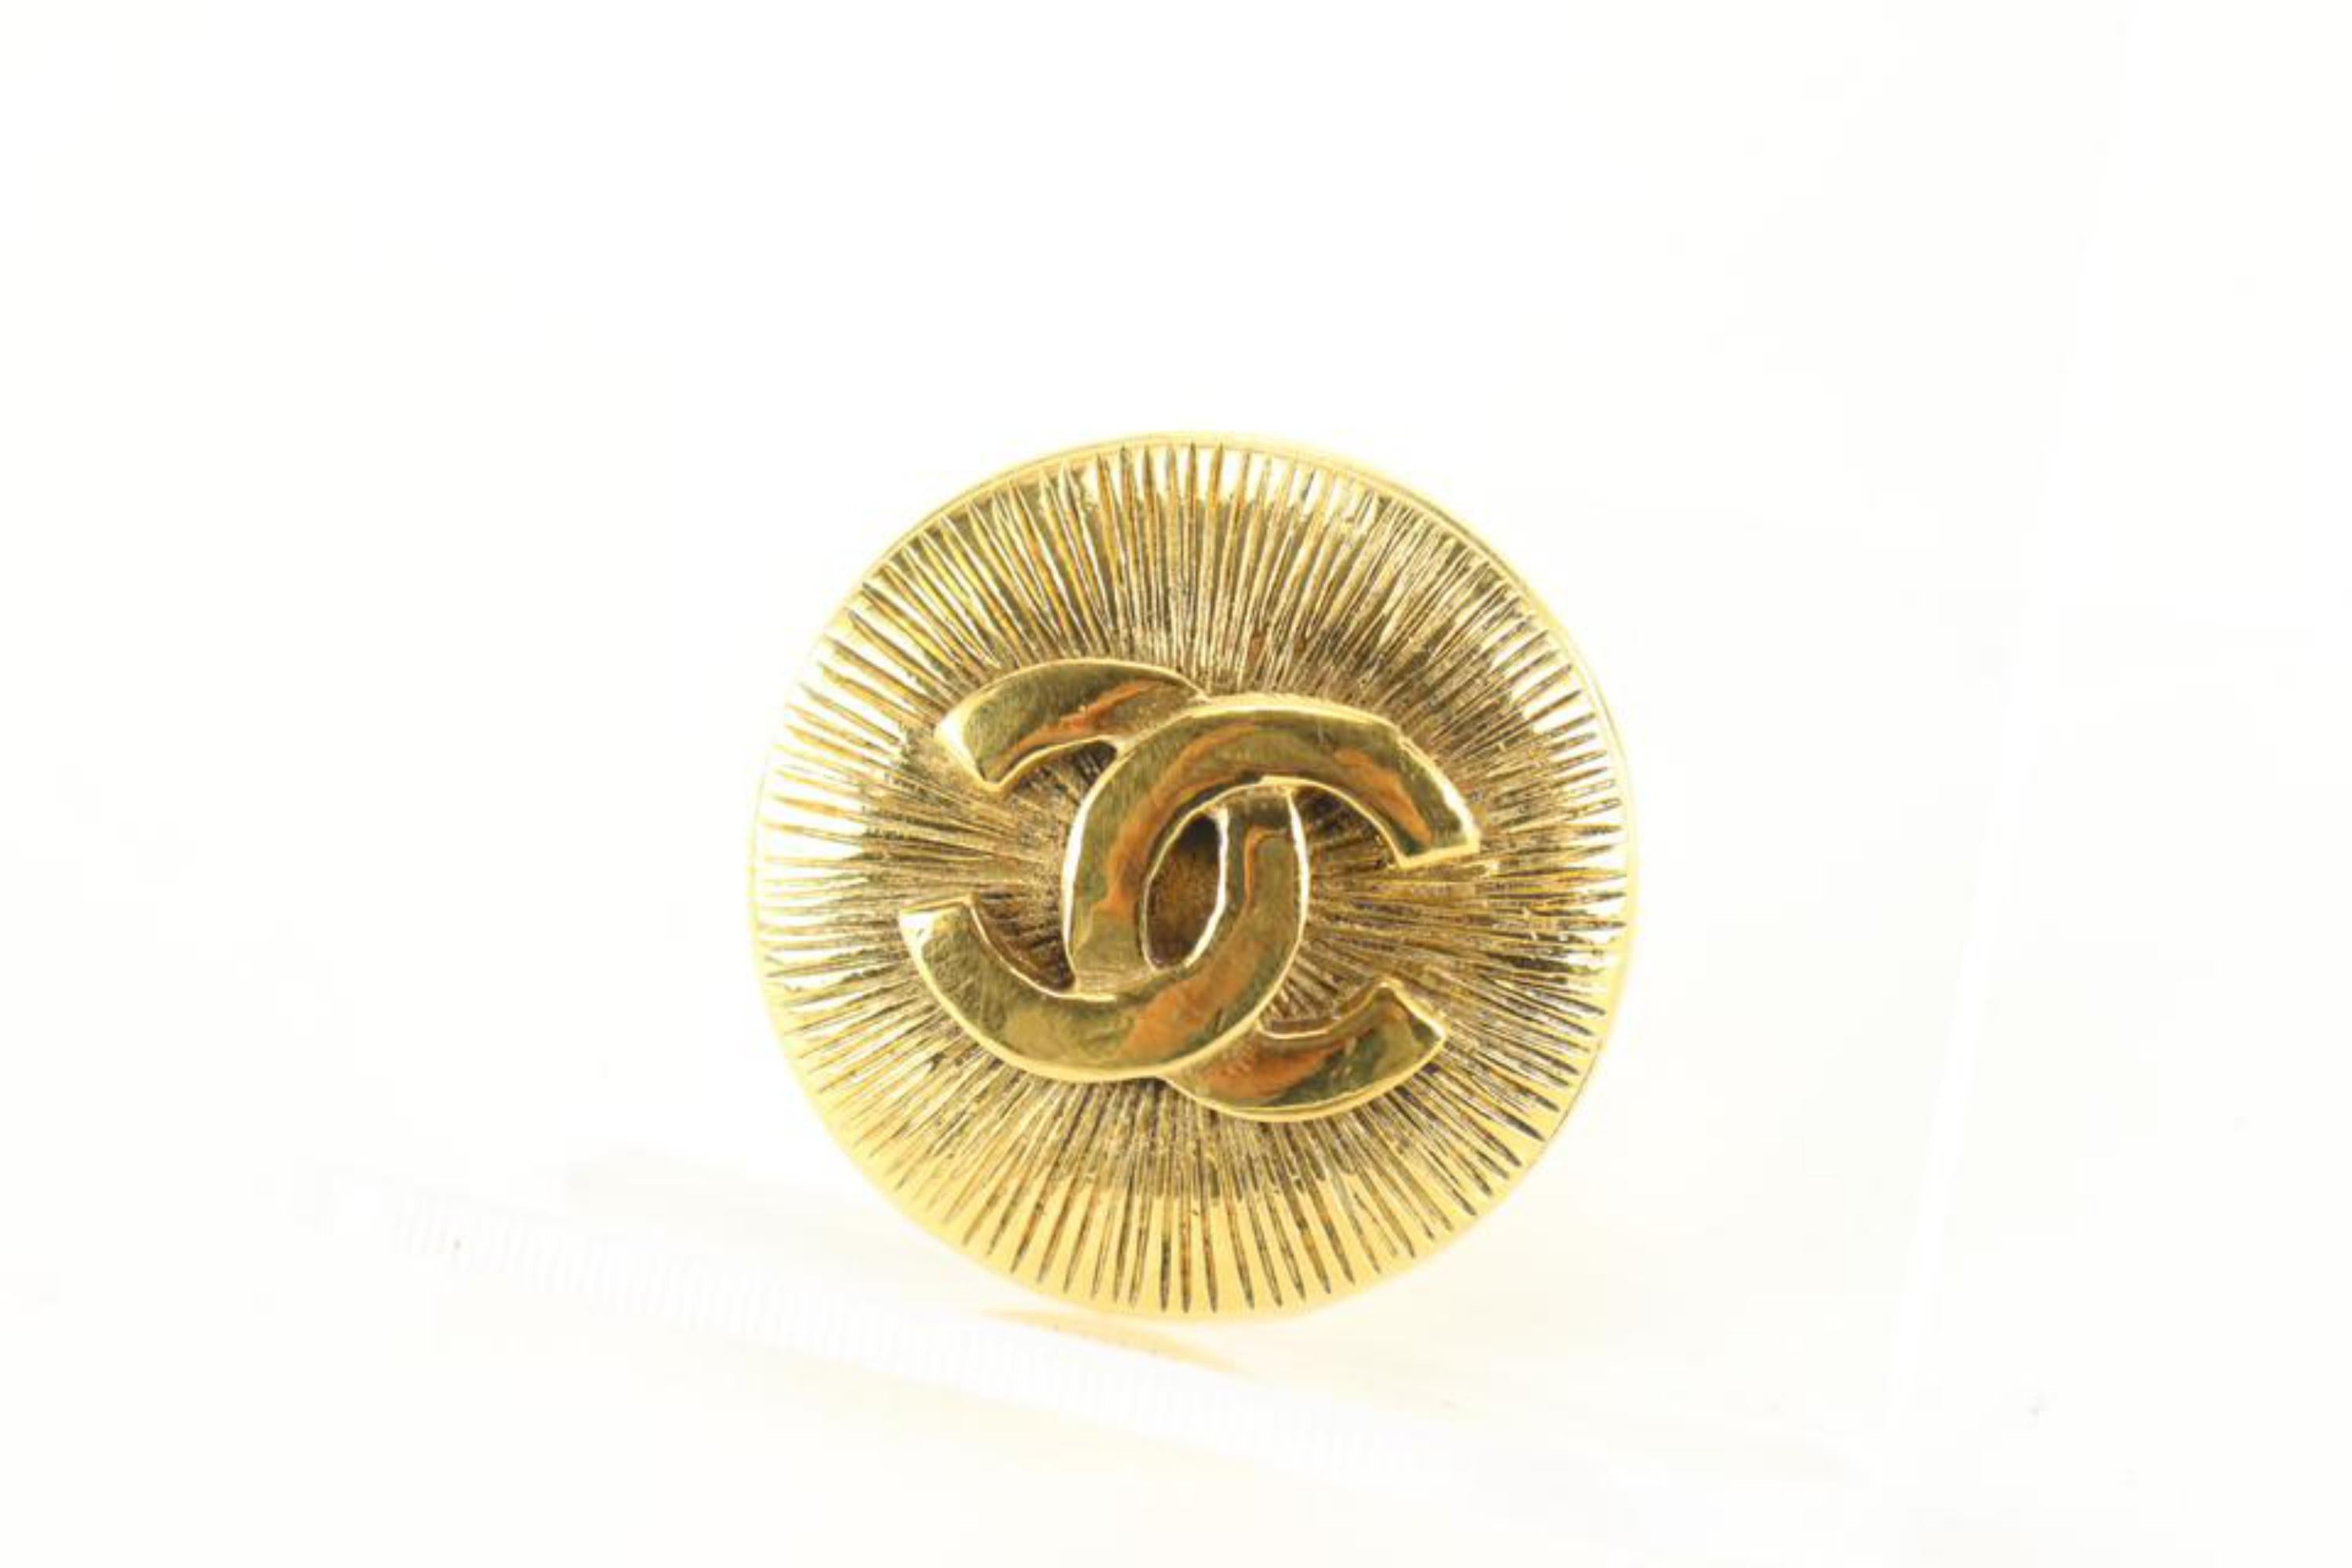 Chanel 24K Gold Plated CC Spiral Brooch Pin 42ck83s